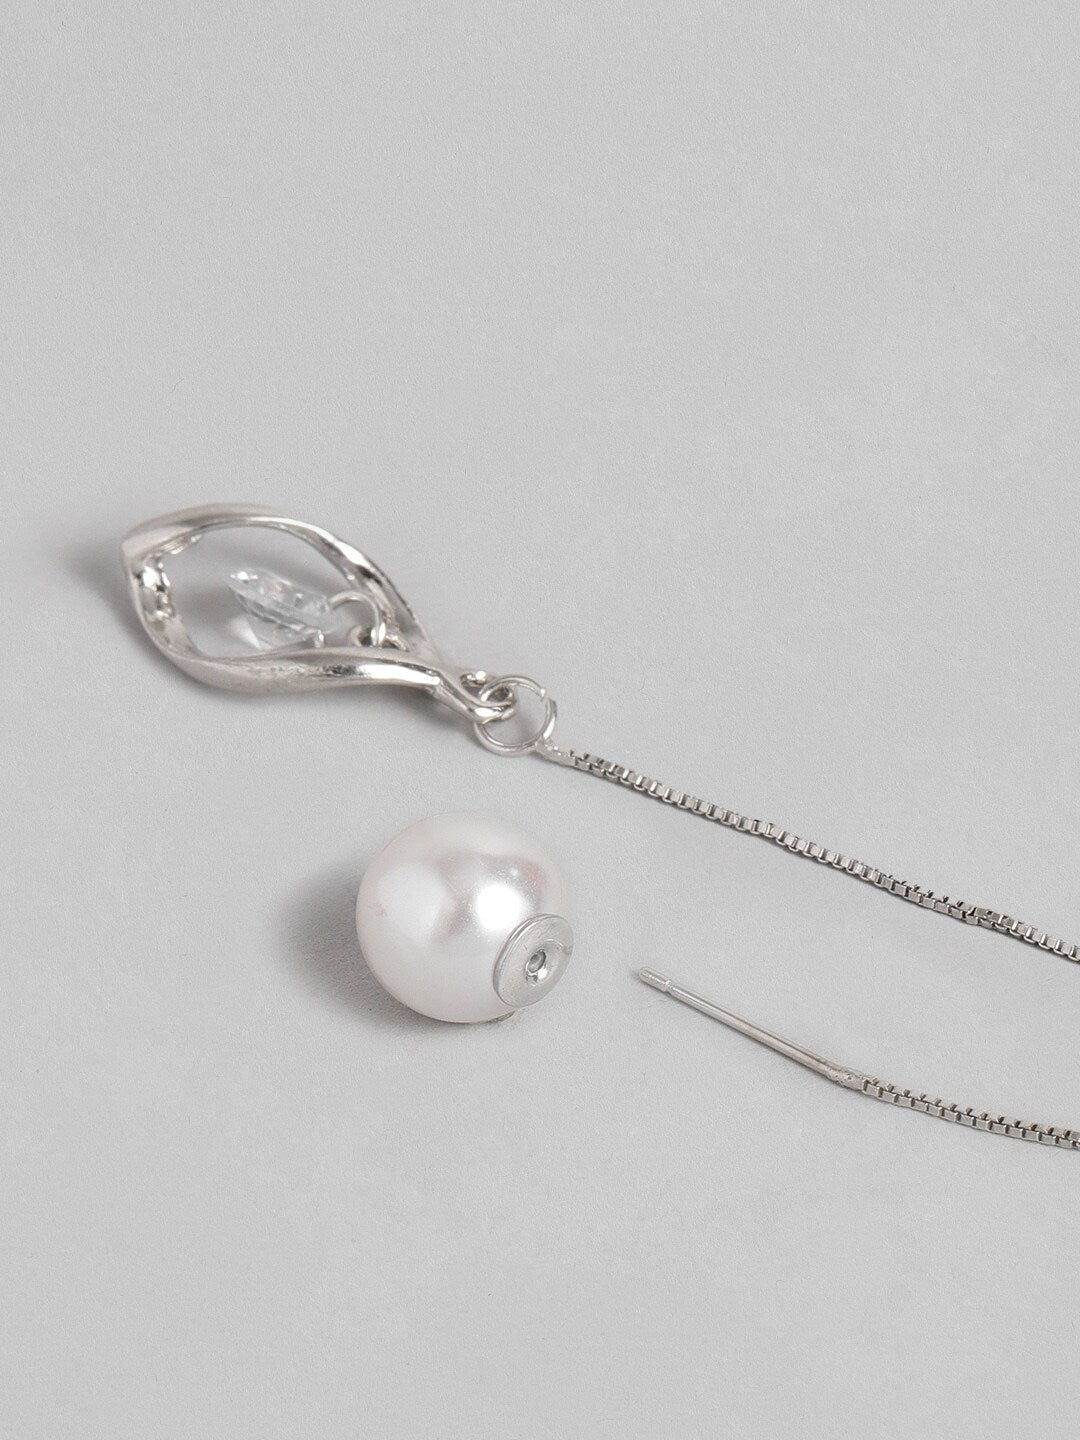 EL REGALO White & Silver-Toned Pearl Beaded Contemporary Double-Sided Drop Earrings - for Women and Girls
Style ID: 16193862